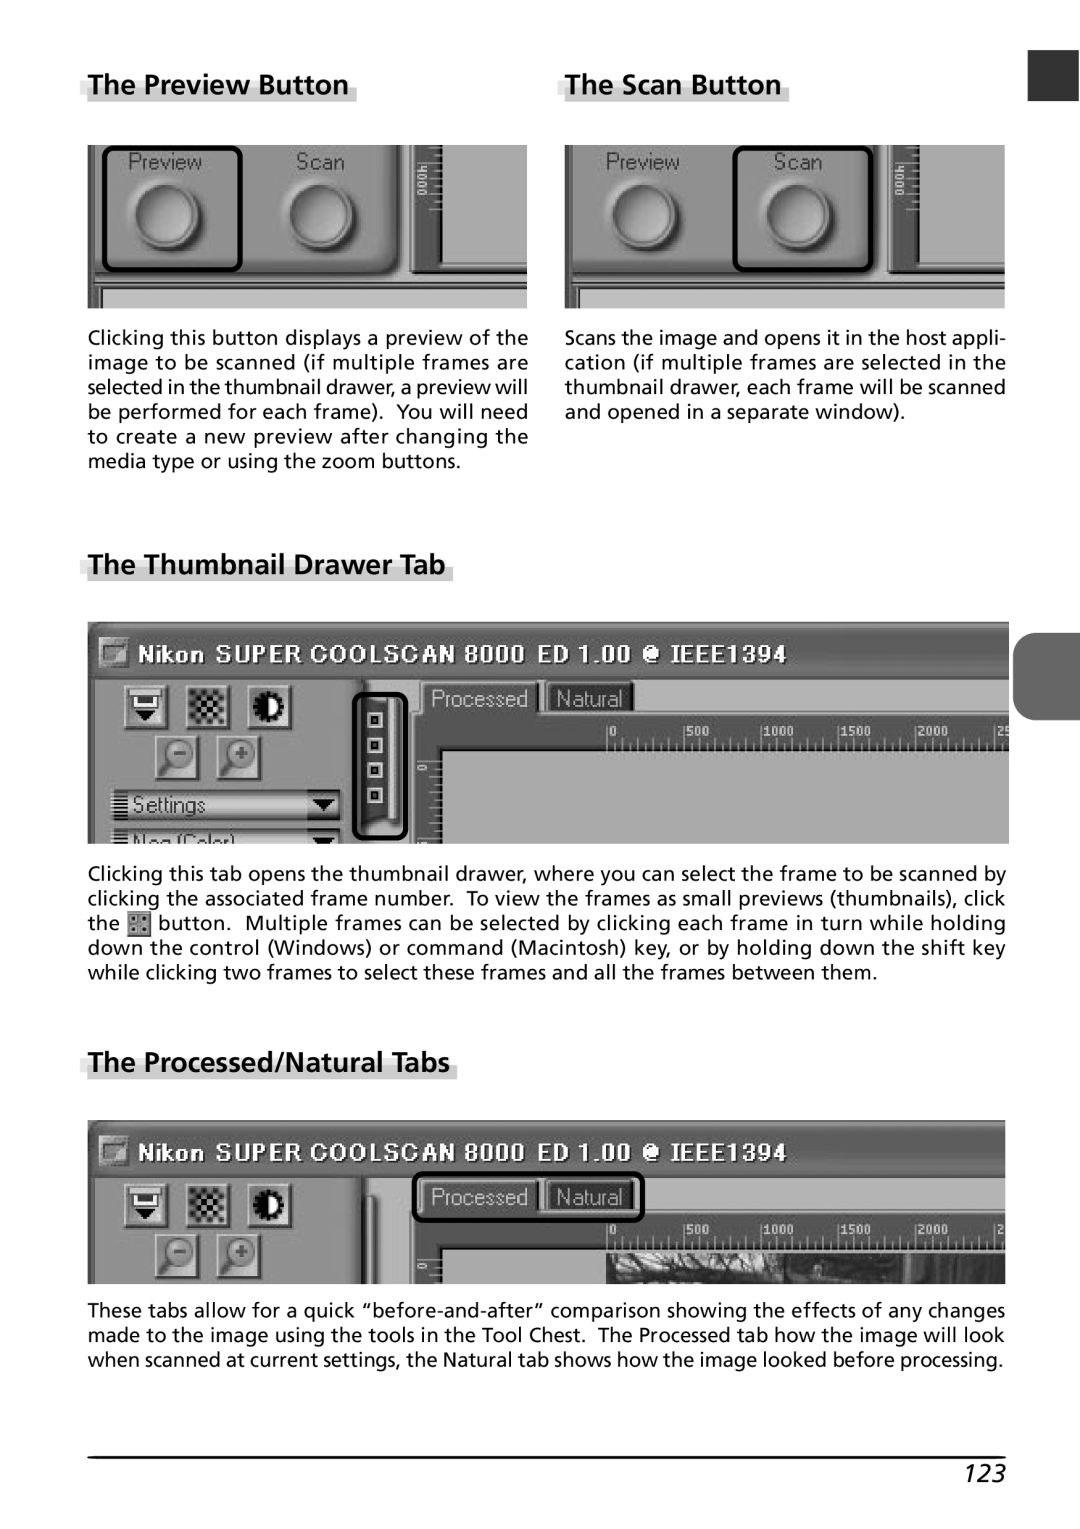 Nikon LS8000 user manual The Preview Button, The Thumbnail Drawer Tab, The Processed/Natural Tabs, The Scan Button 